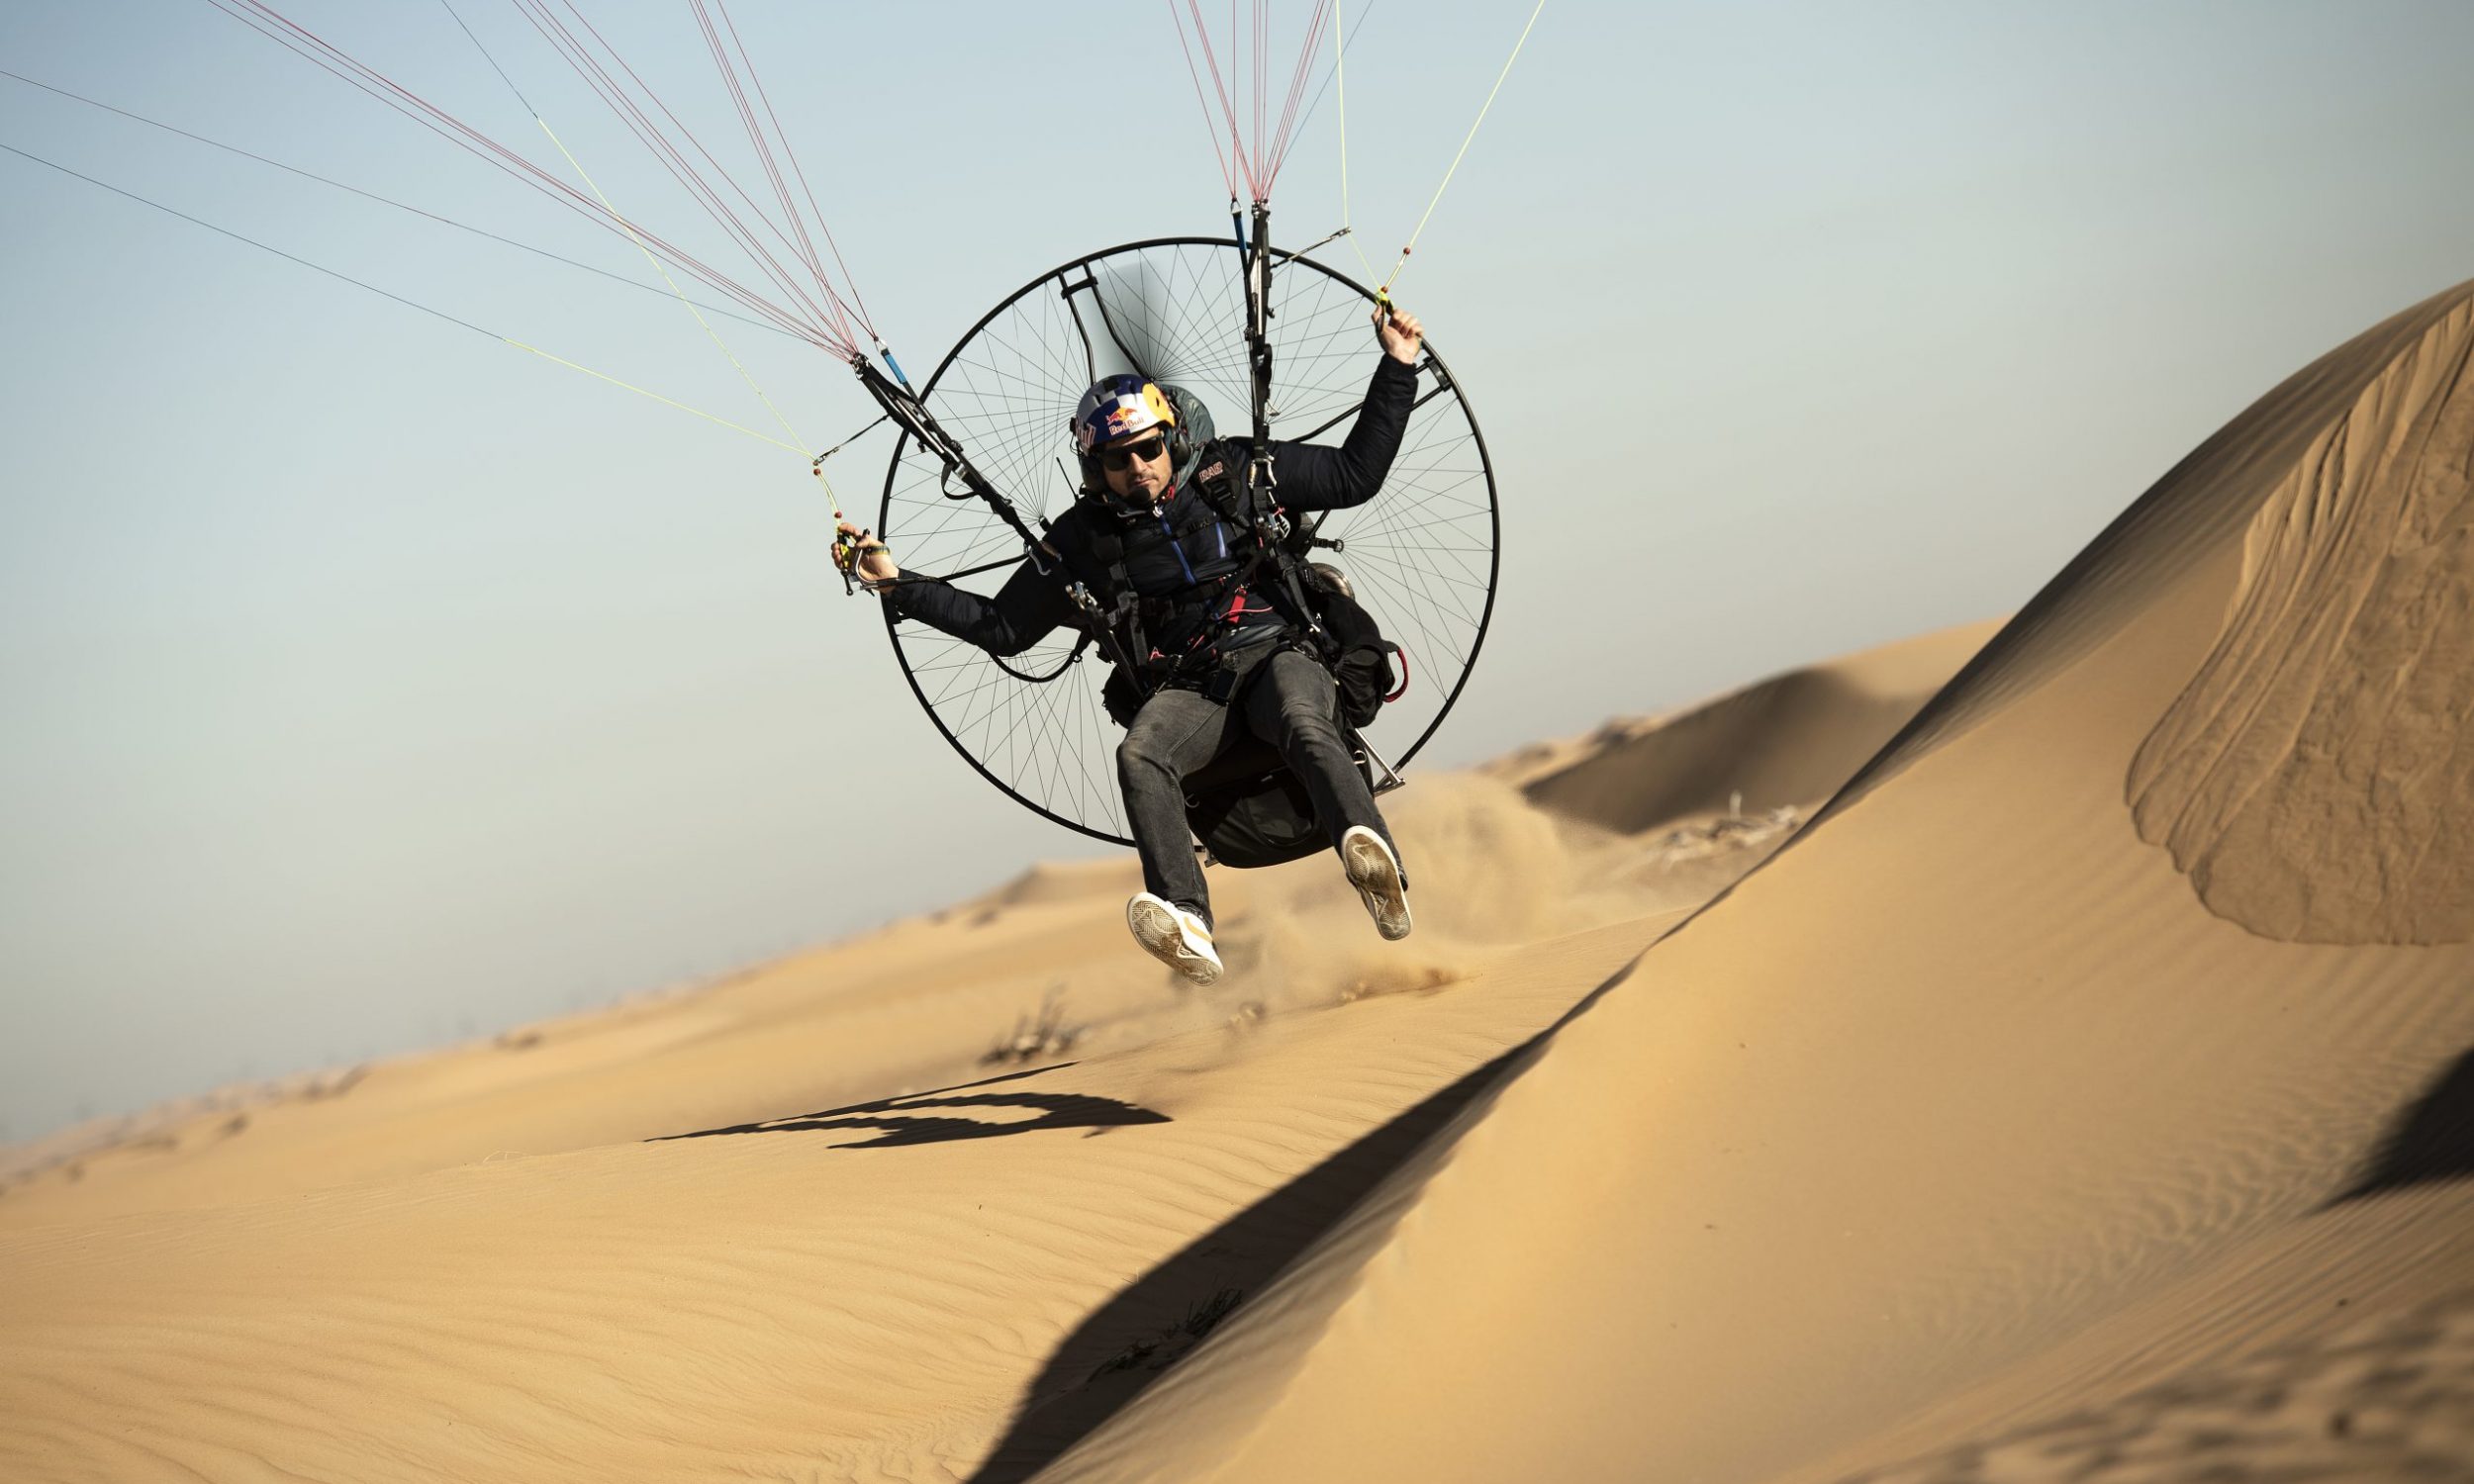 Horacio LIorens of Spain performs during  practice session at Dubai desert in United Arab Emirates on January 12th, 2021